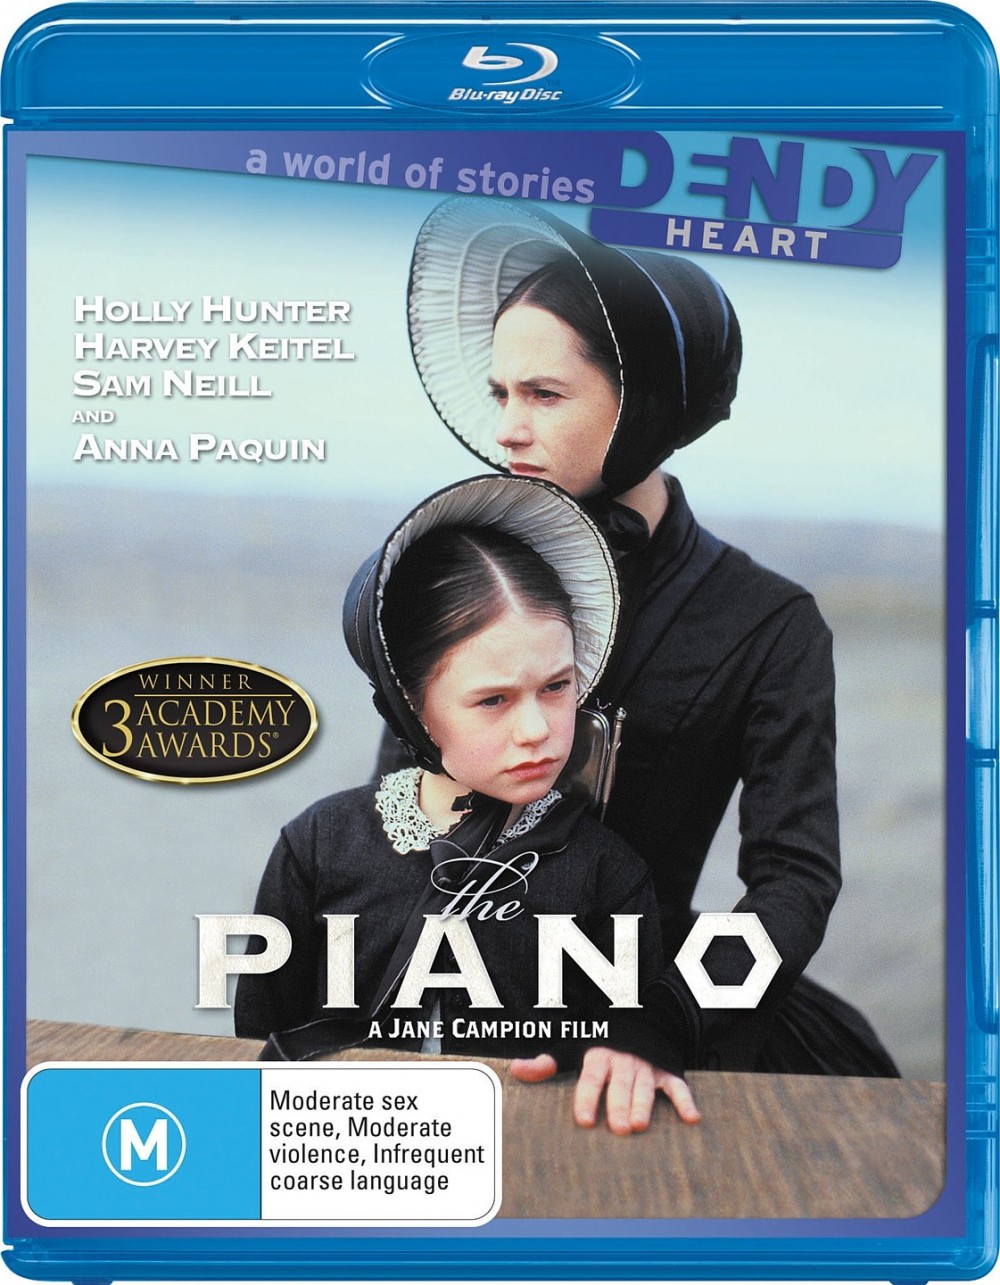 the.piano.1993.bluray.front.cover.aus.jpg